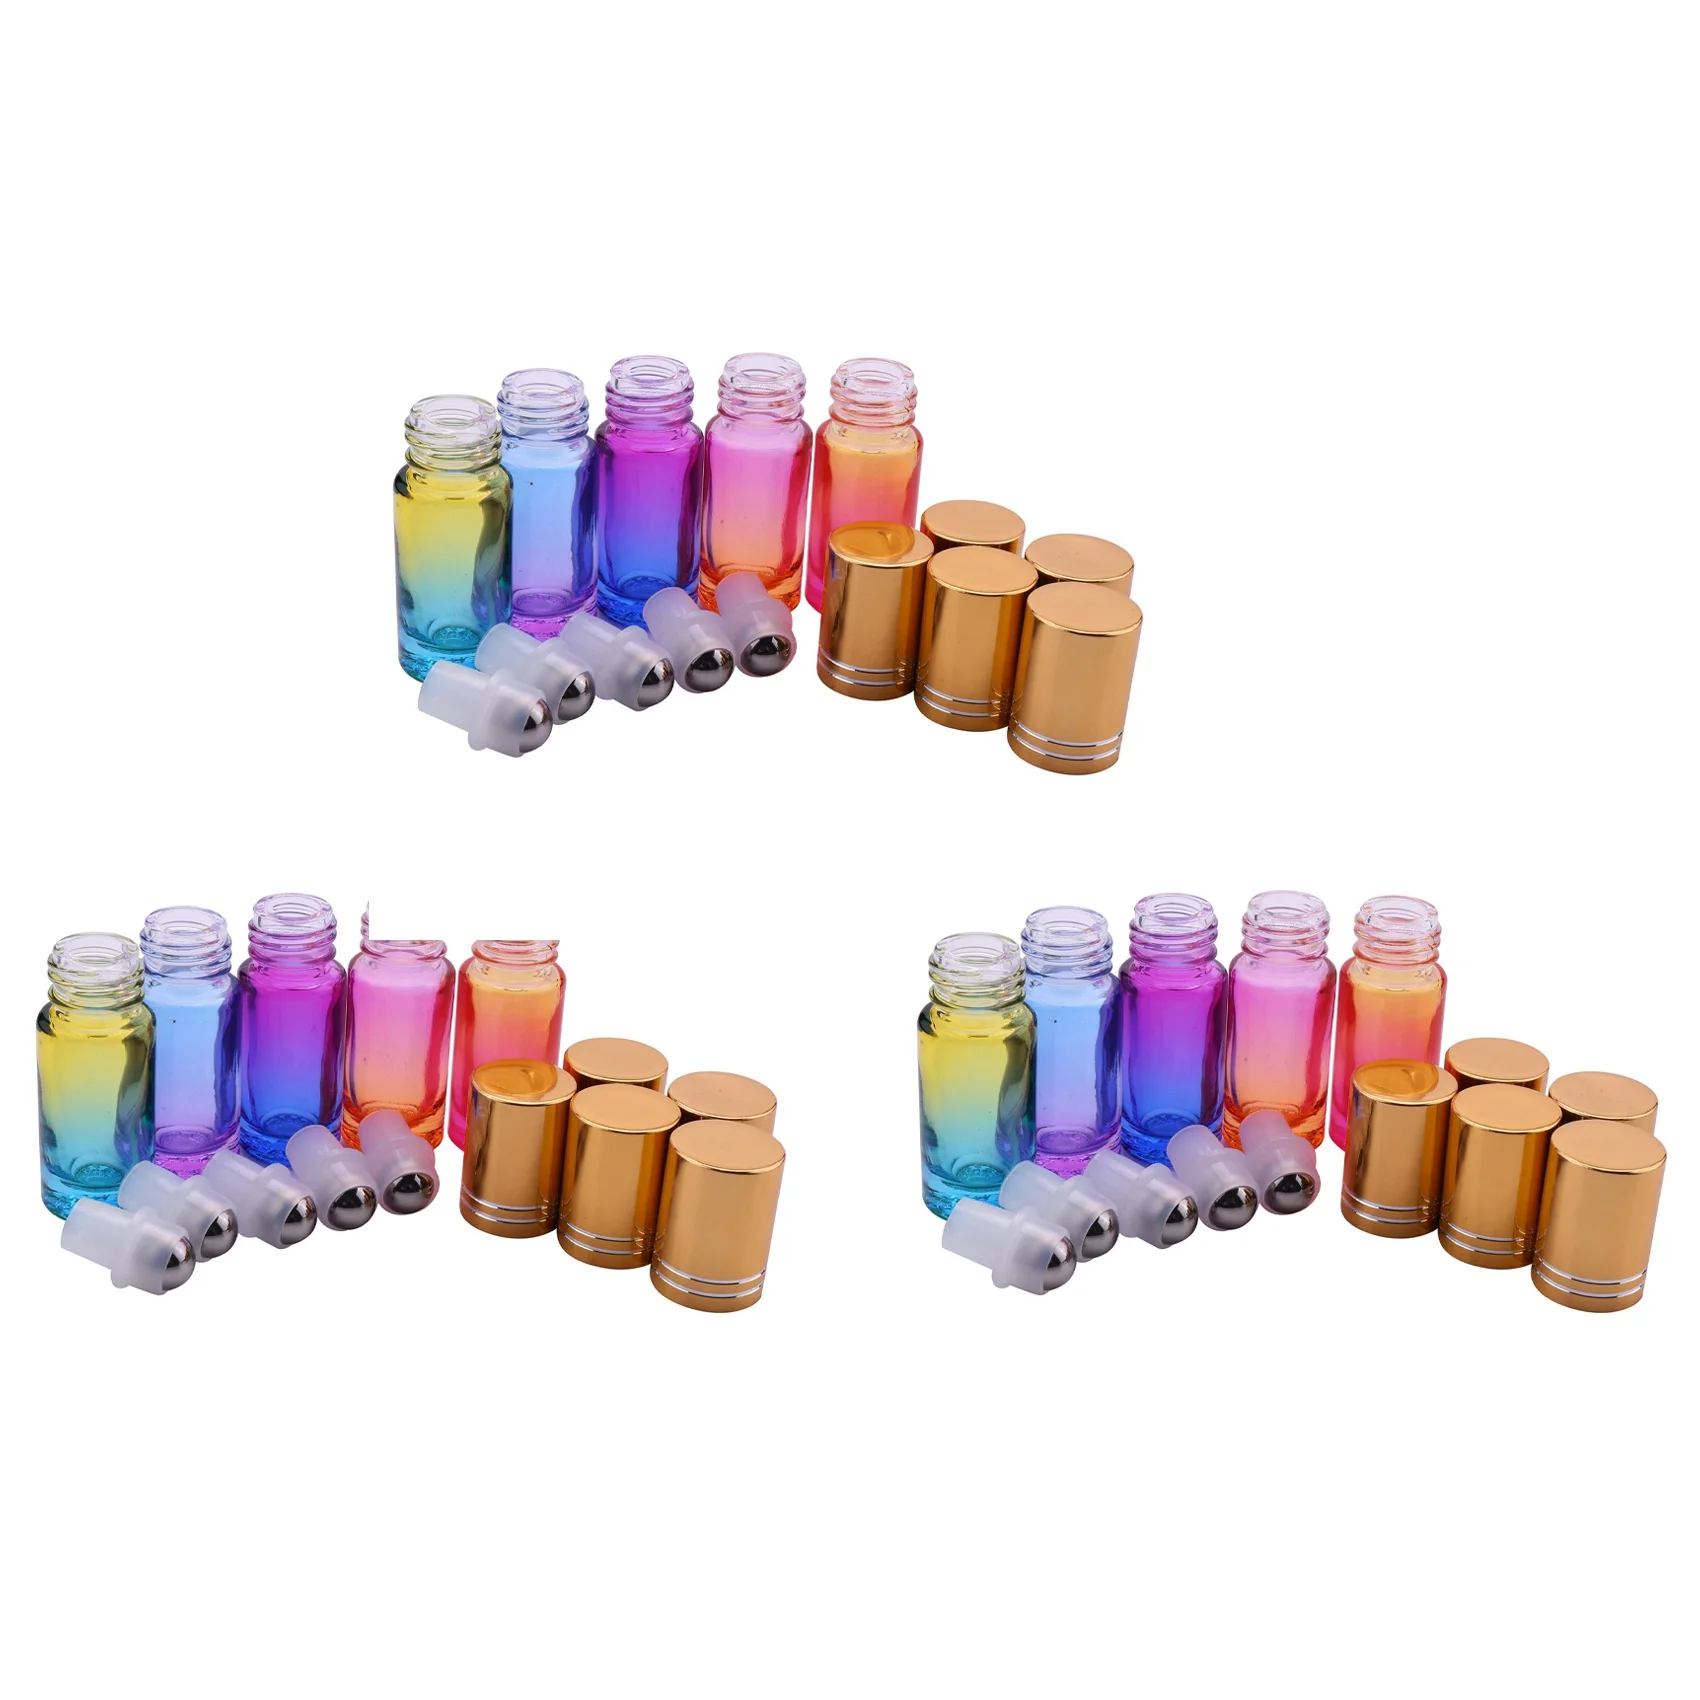 

15Pcs 5Ml Thick Glass Roll on Essential Oil Empty Parfum Bottles Roller Ball 5 Colors Bottle with Gold Cover